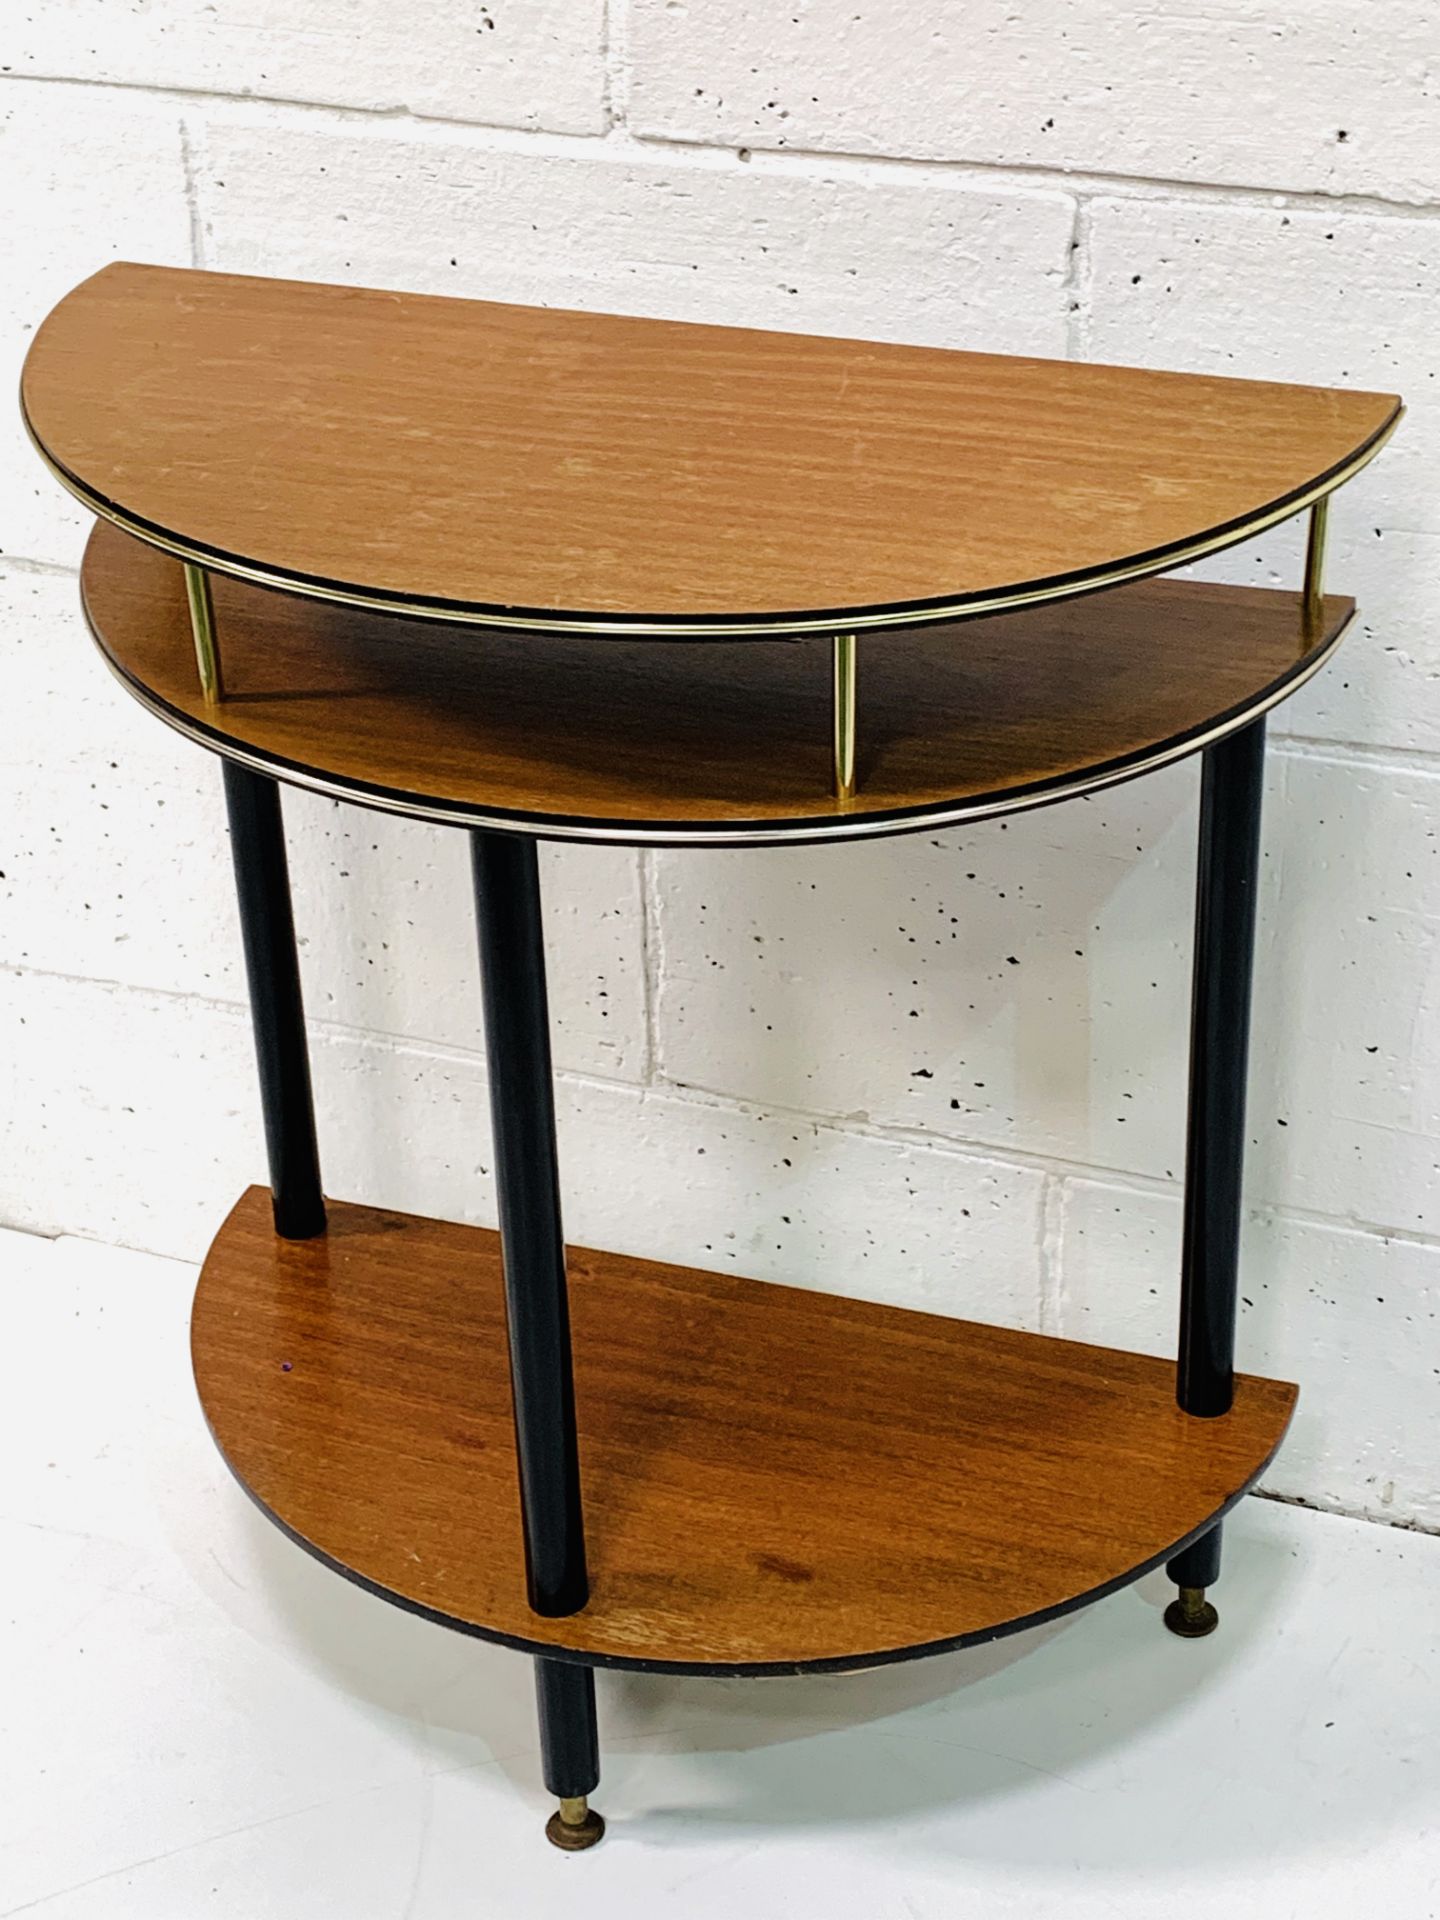 1950's demi-lune display table. - Image 3 of 3